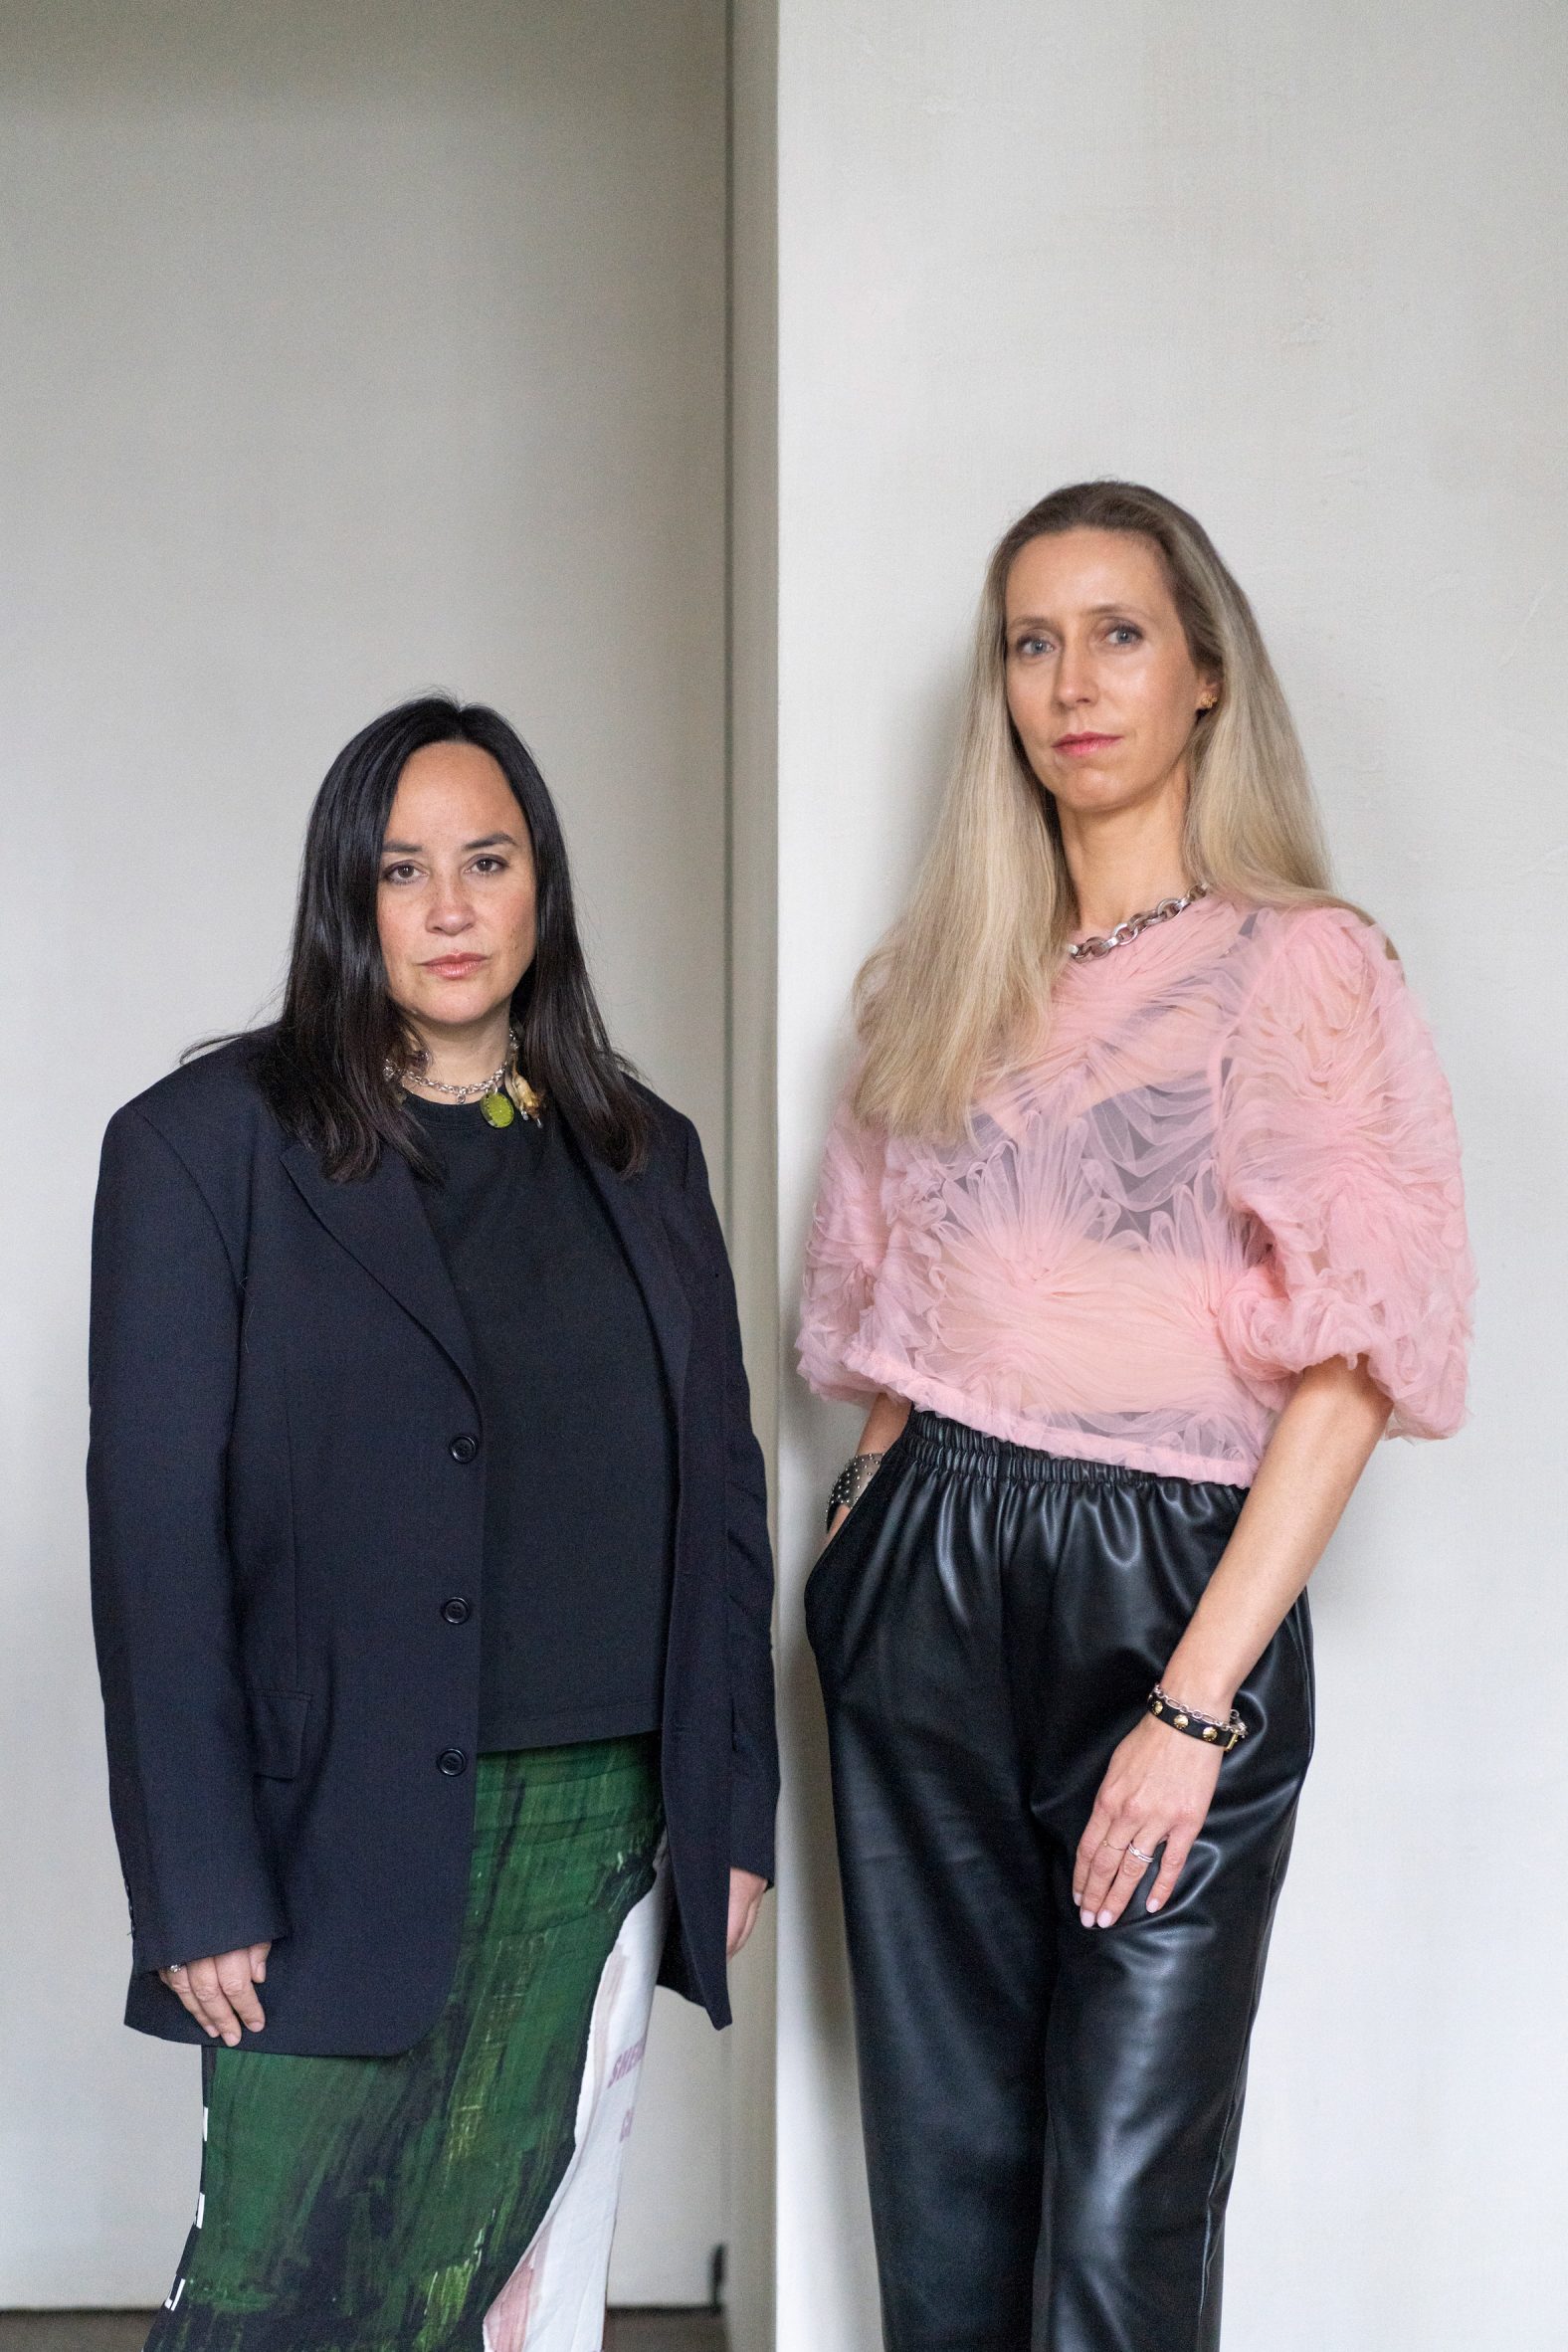 Collectible founders Clélie Debehault and Liv Vaisberg